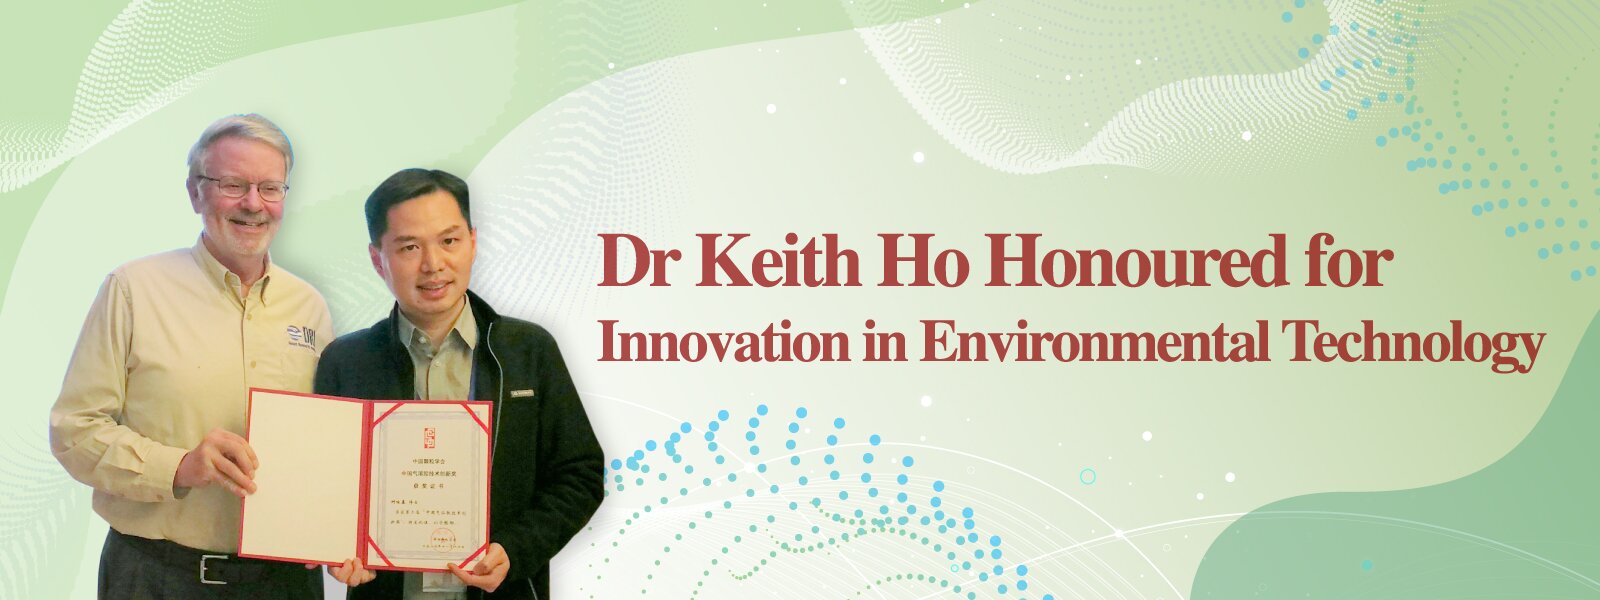 Dr Keith Ho Honoured for Innovation in Environmental Technology